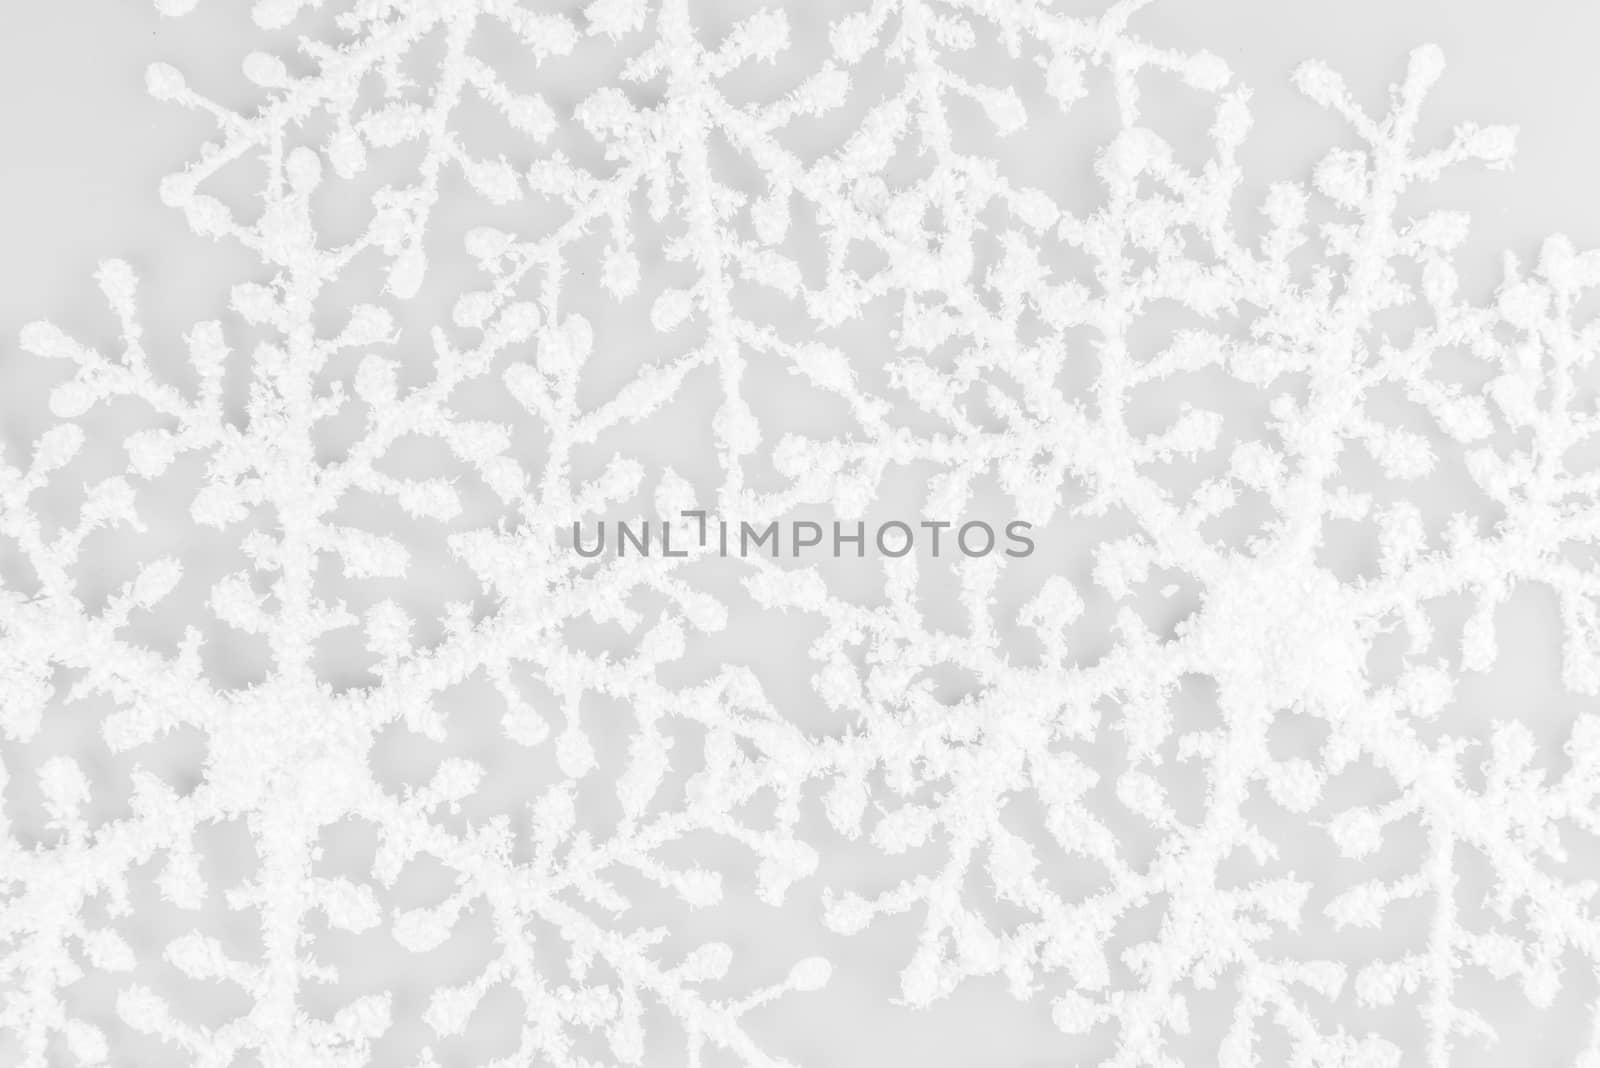 White Snowflakes on isolated on white background. Christmas composition. Frame made of white snowflakes on white background.